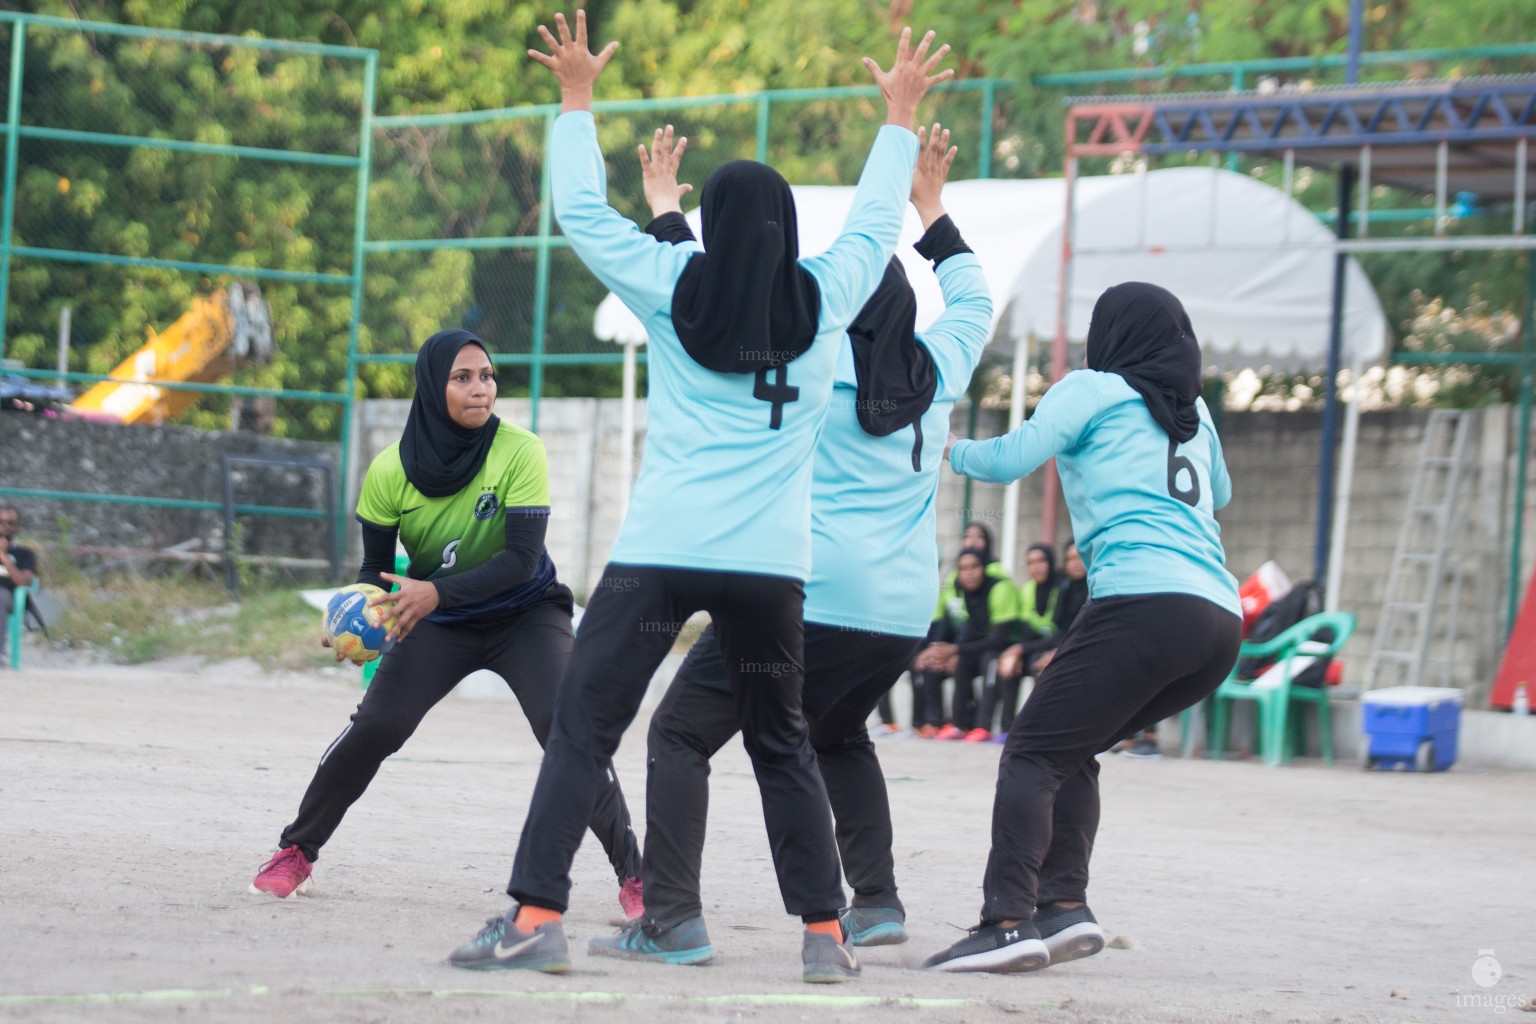 Maldives Immigration vs Ministry of Finance in Inter Office Handball Tournament 2019 - Women's 2nd Division Final, held in National Handball Grounds on 5th March 2019 (Hassan Simah /Images.mv)